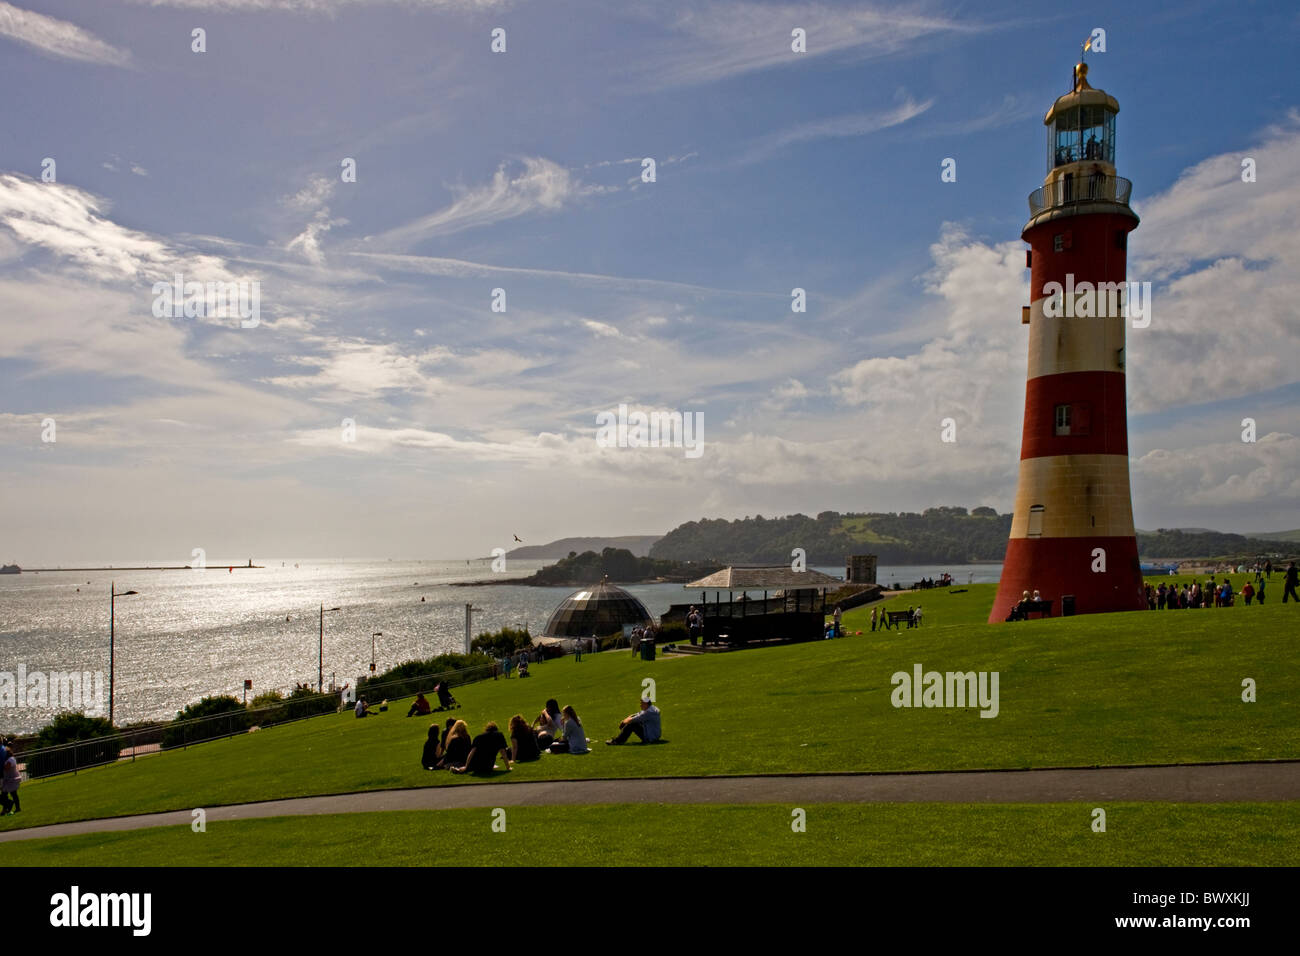 Plymouth Hoe et Smeaton's Tower, Plymouth, Devon, UK Banque D'Images